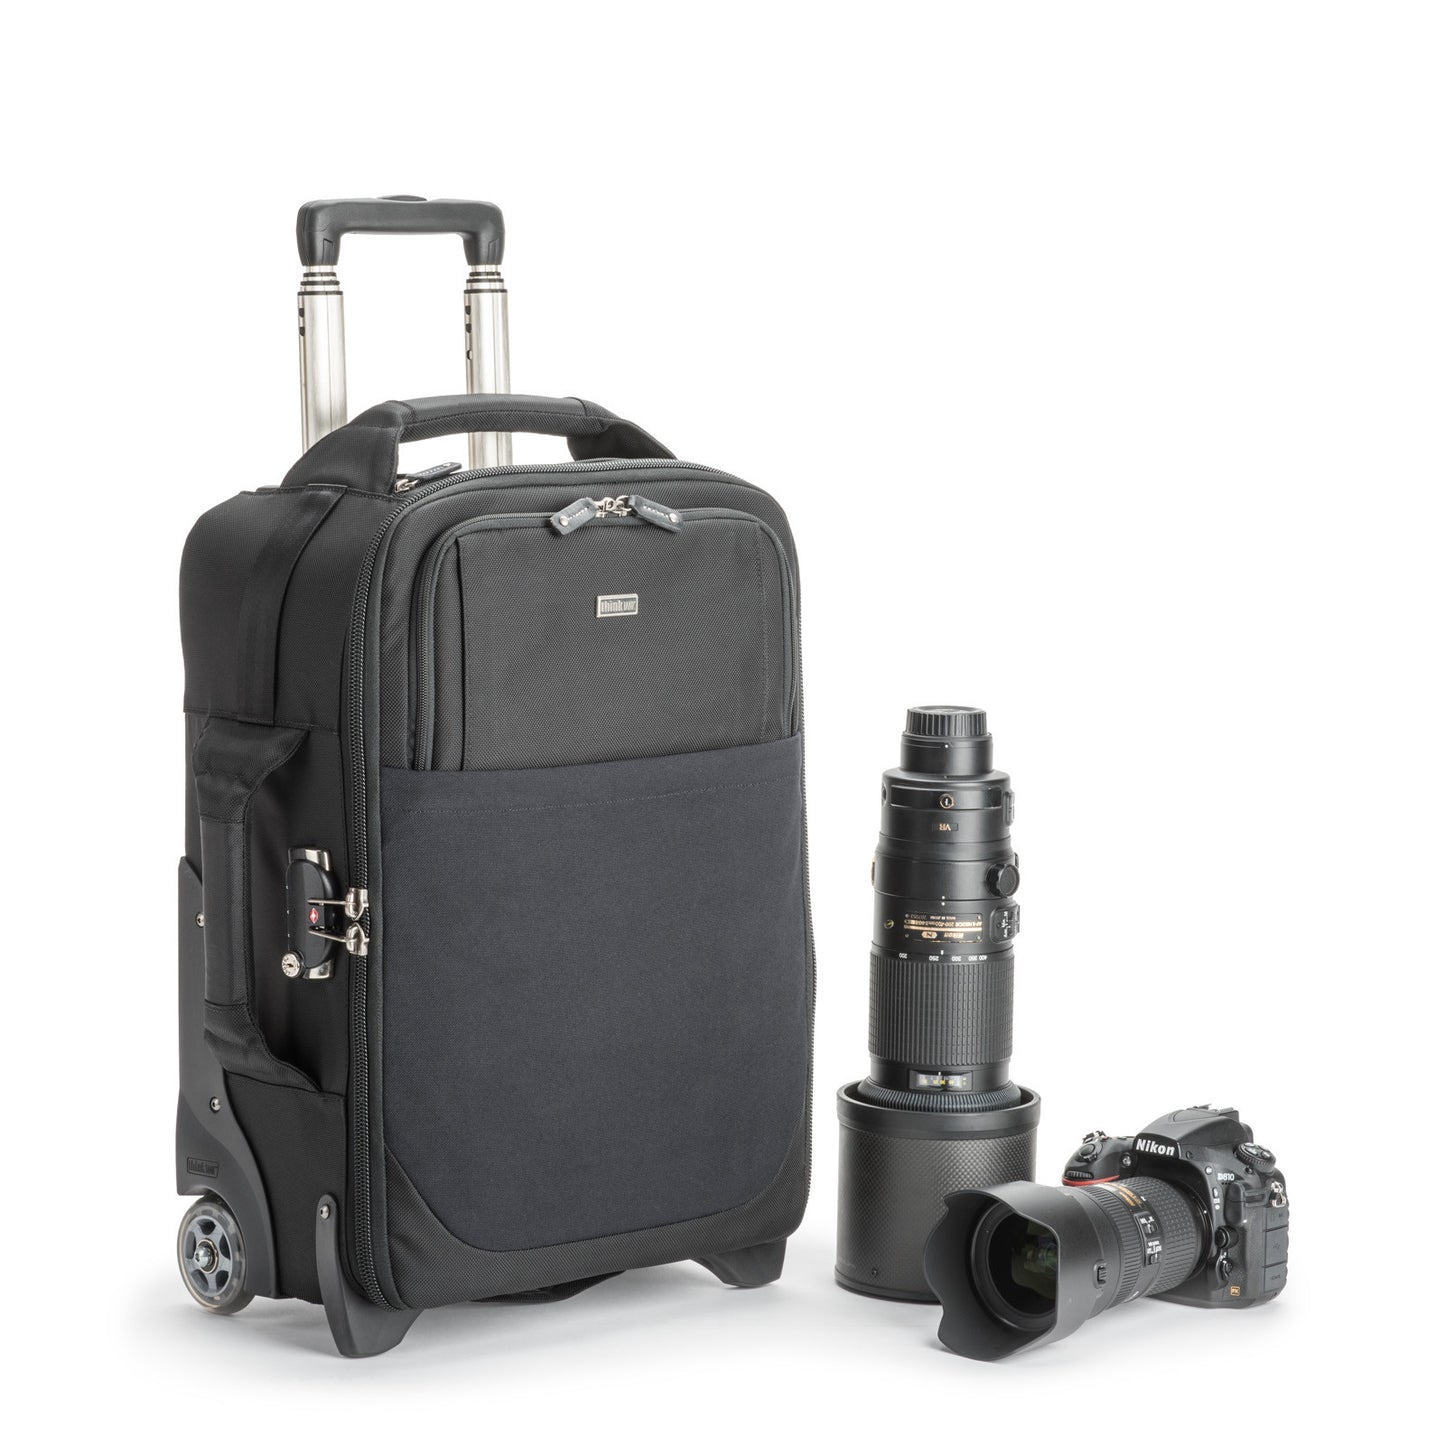 
                  
                    Specially designed interior to maximize gear for carry on, meets most U.S. and international airline carry on requirements
                  
                